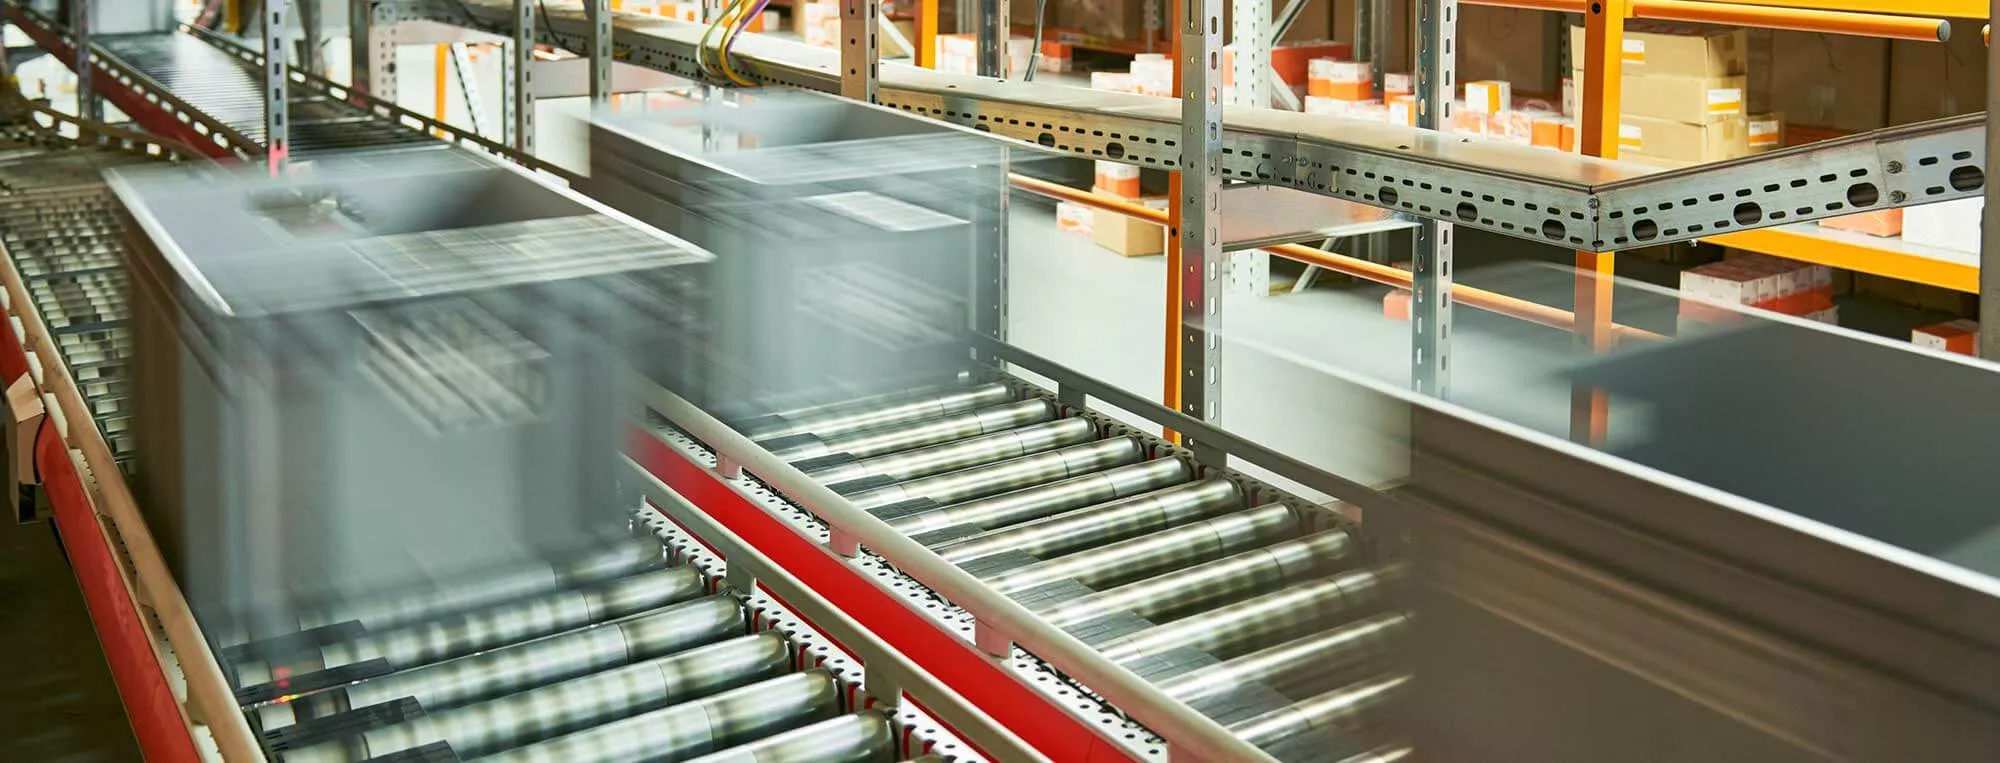 Solutions for Packaging Systems | RINGFEDER®